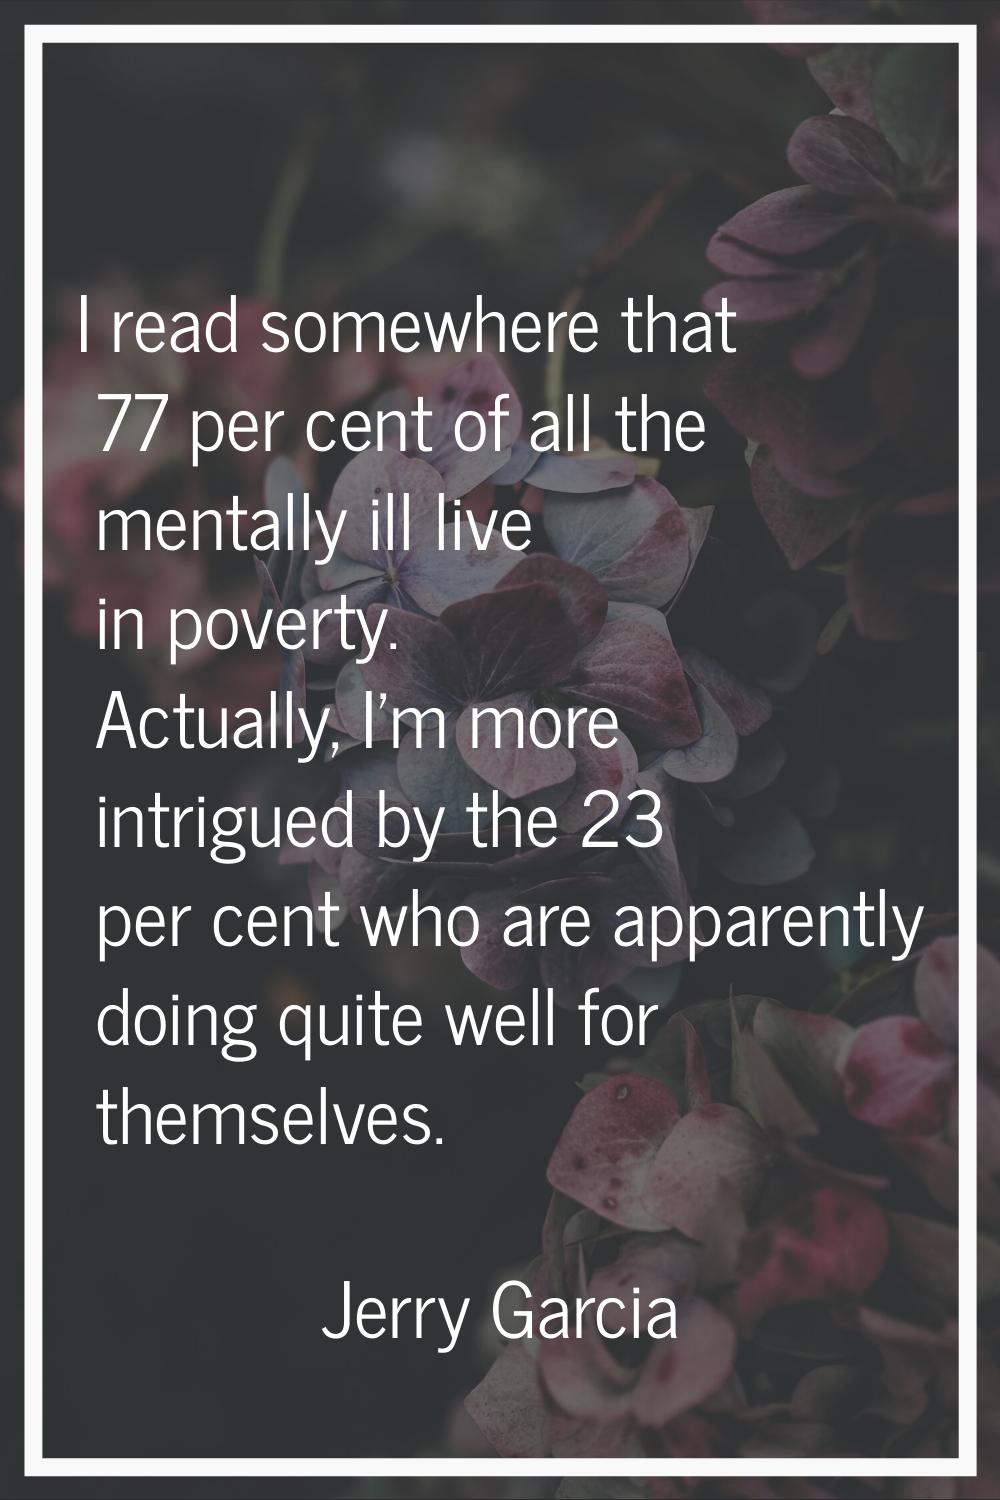 I read somewhere that 77 per cent of all the mentally ill live in poverty. Actually, I'm more intri